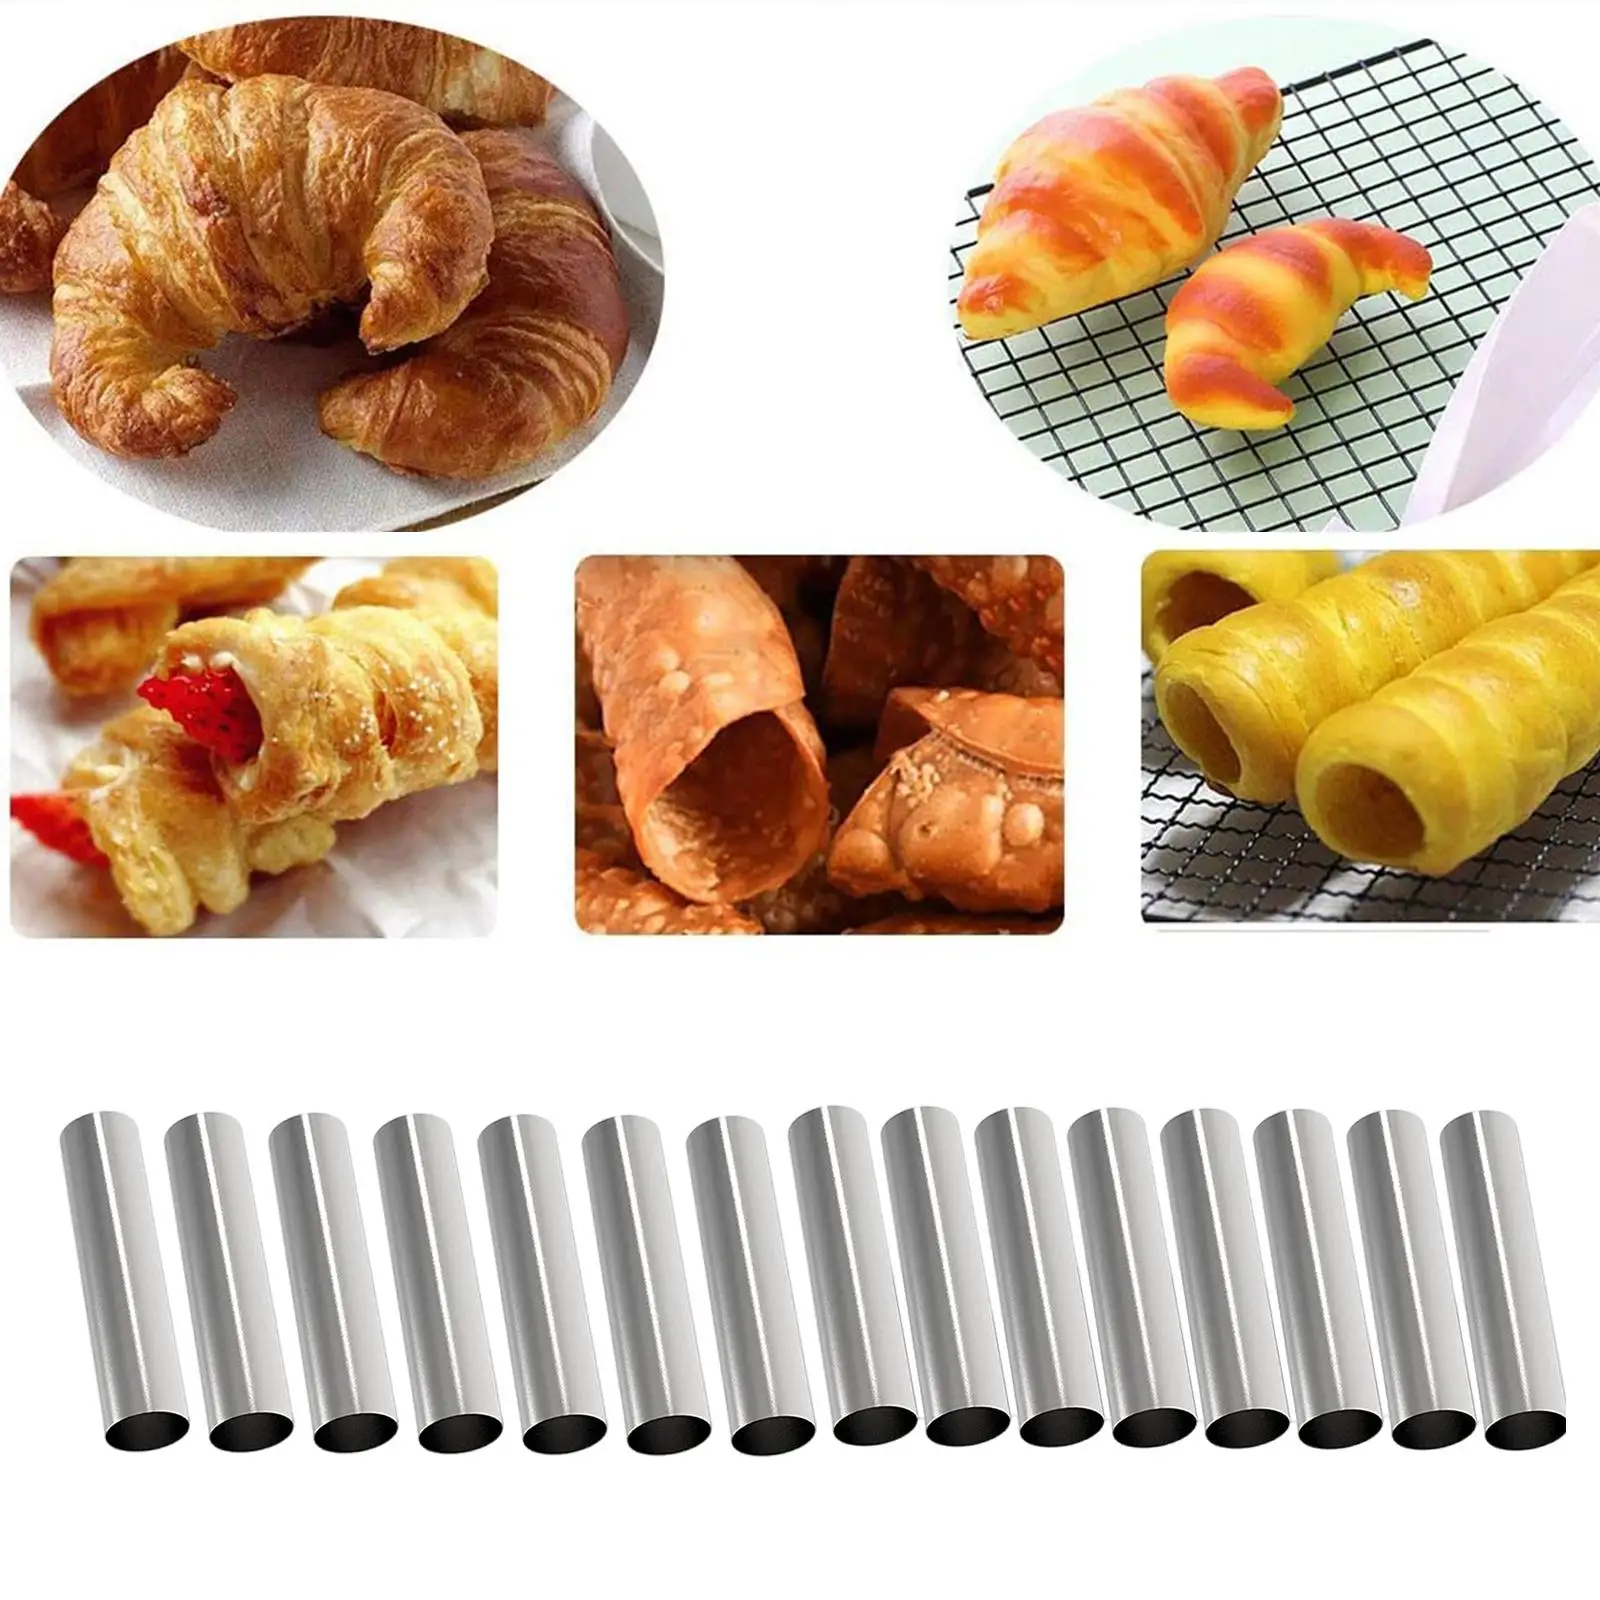 15 Pieces Cannoli Form Tubes Cannoli Tubes Shells for Ice Cream Cones Pastry